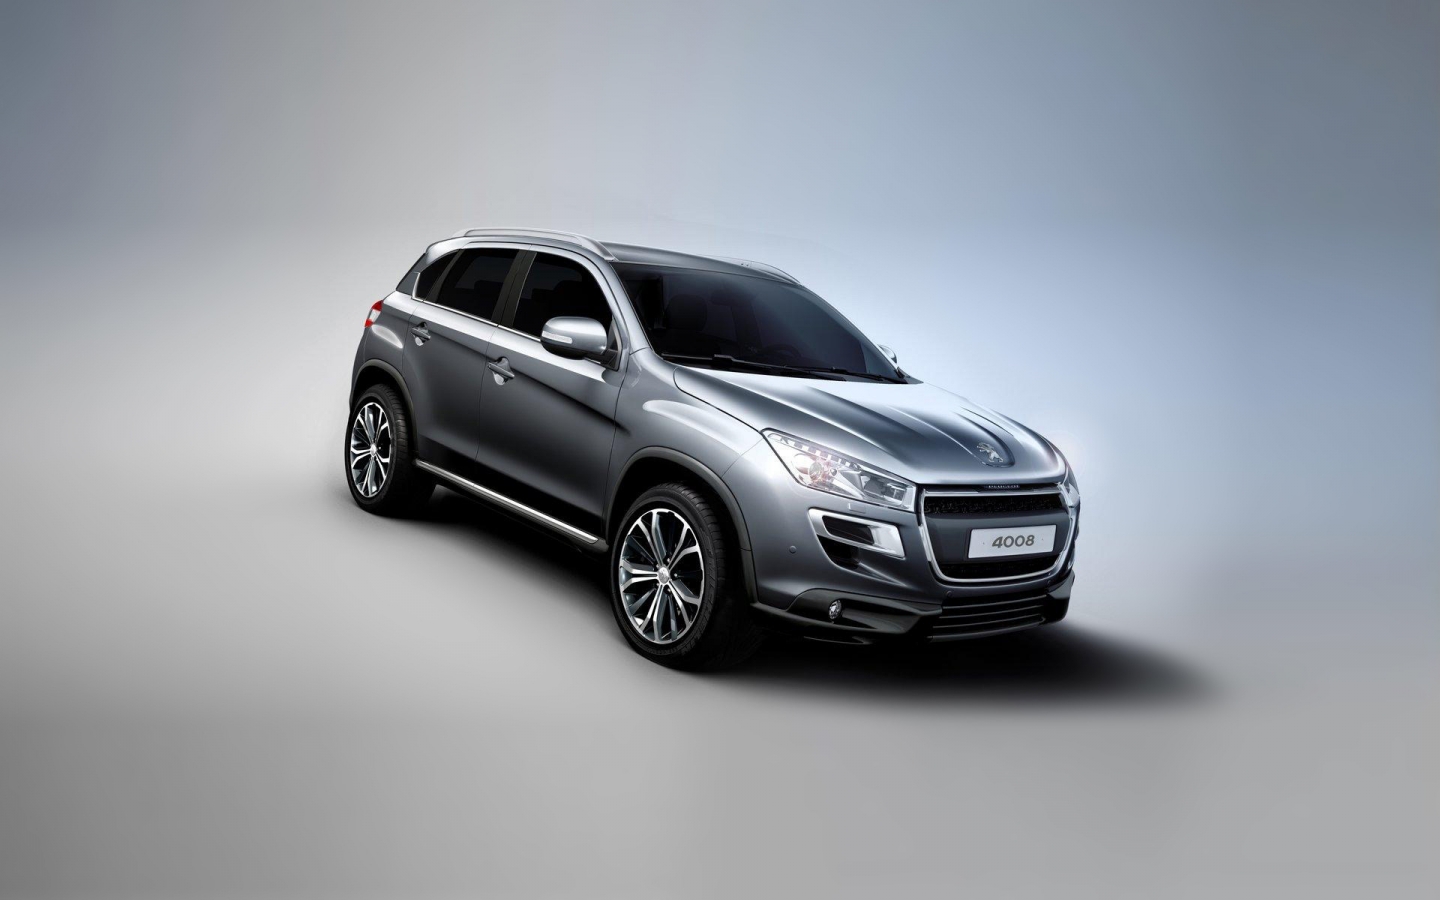 2012 Peugeot 4008 Grey for 1440 x 900 widescreen resolution